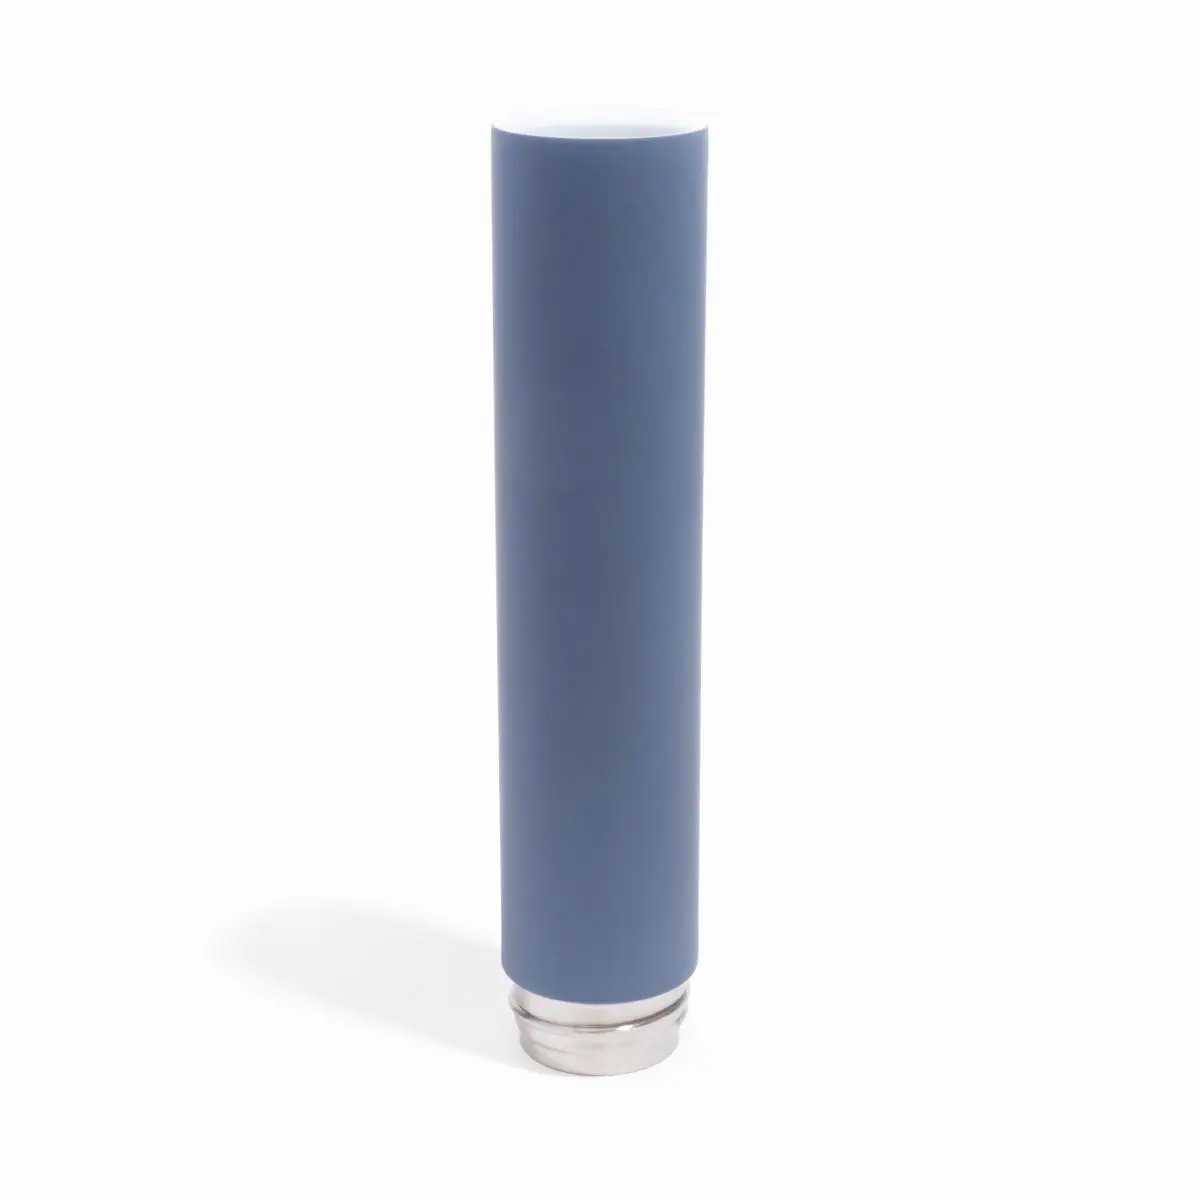 Chill - Limited Edition - Steel Blue Rubberized by Chill Steel Pipes